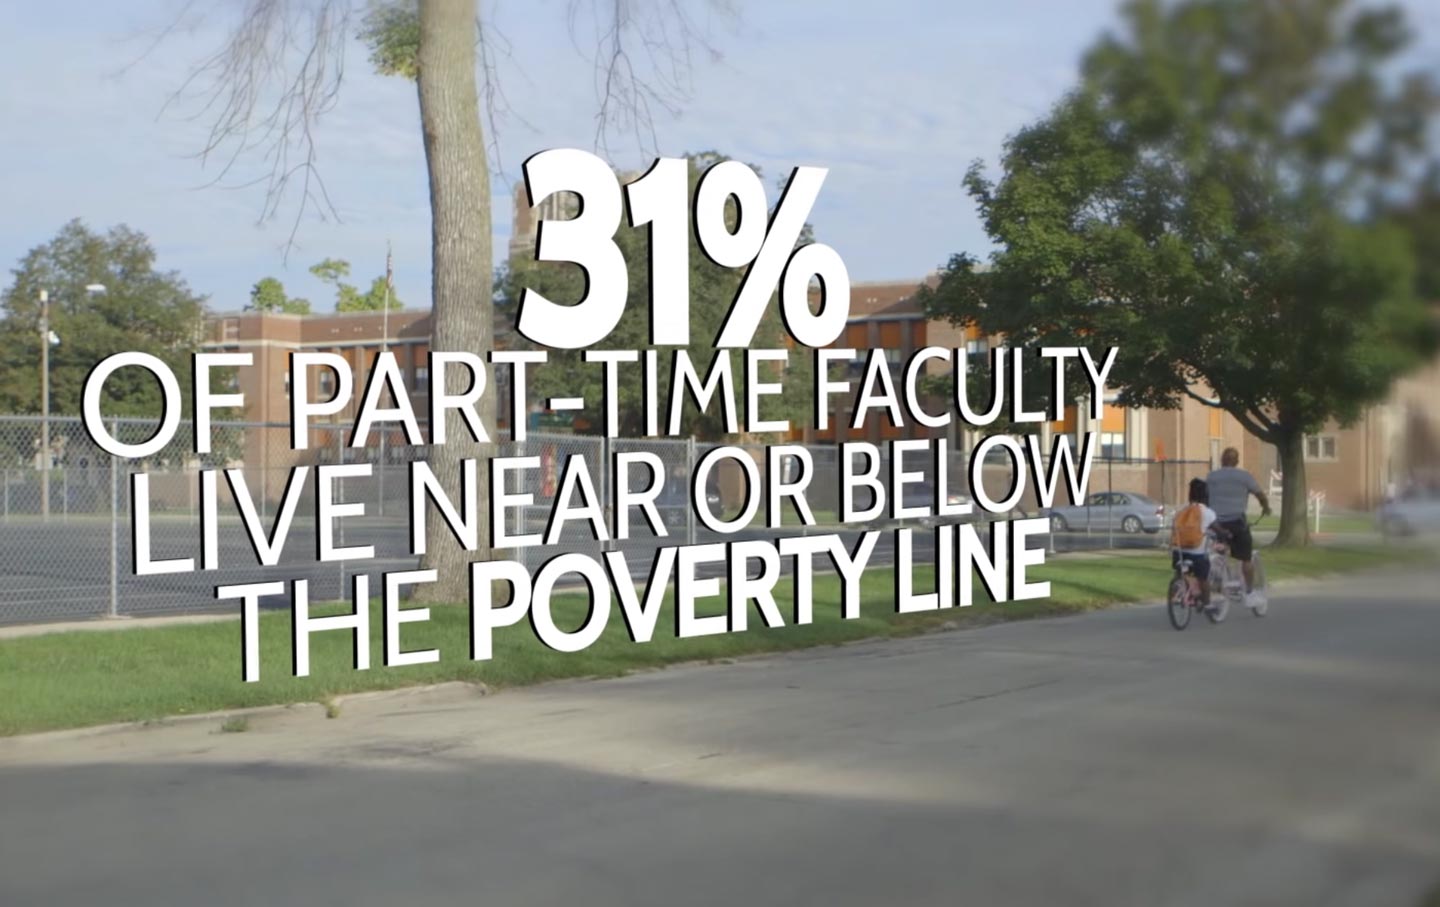 Teaching While Poor: Adjunct Professors and the Fight for Fair Wages